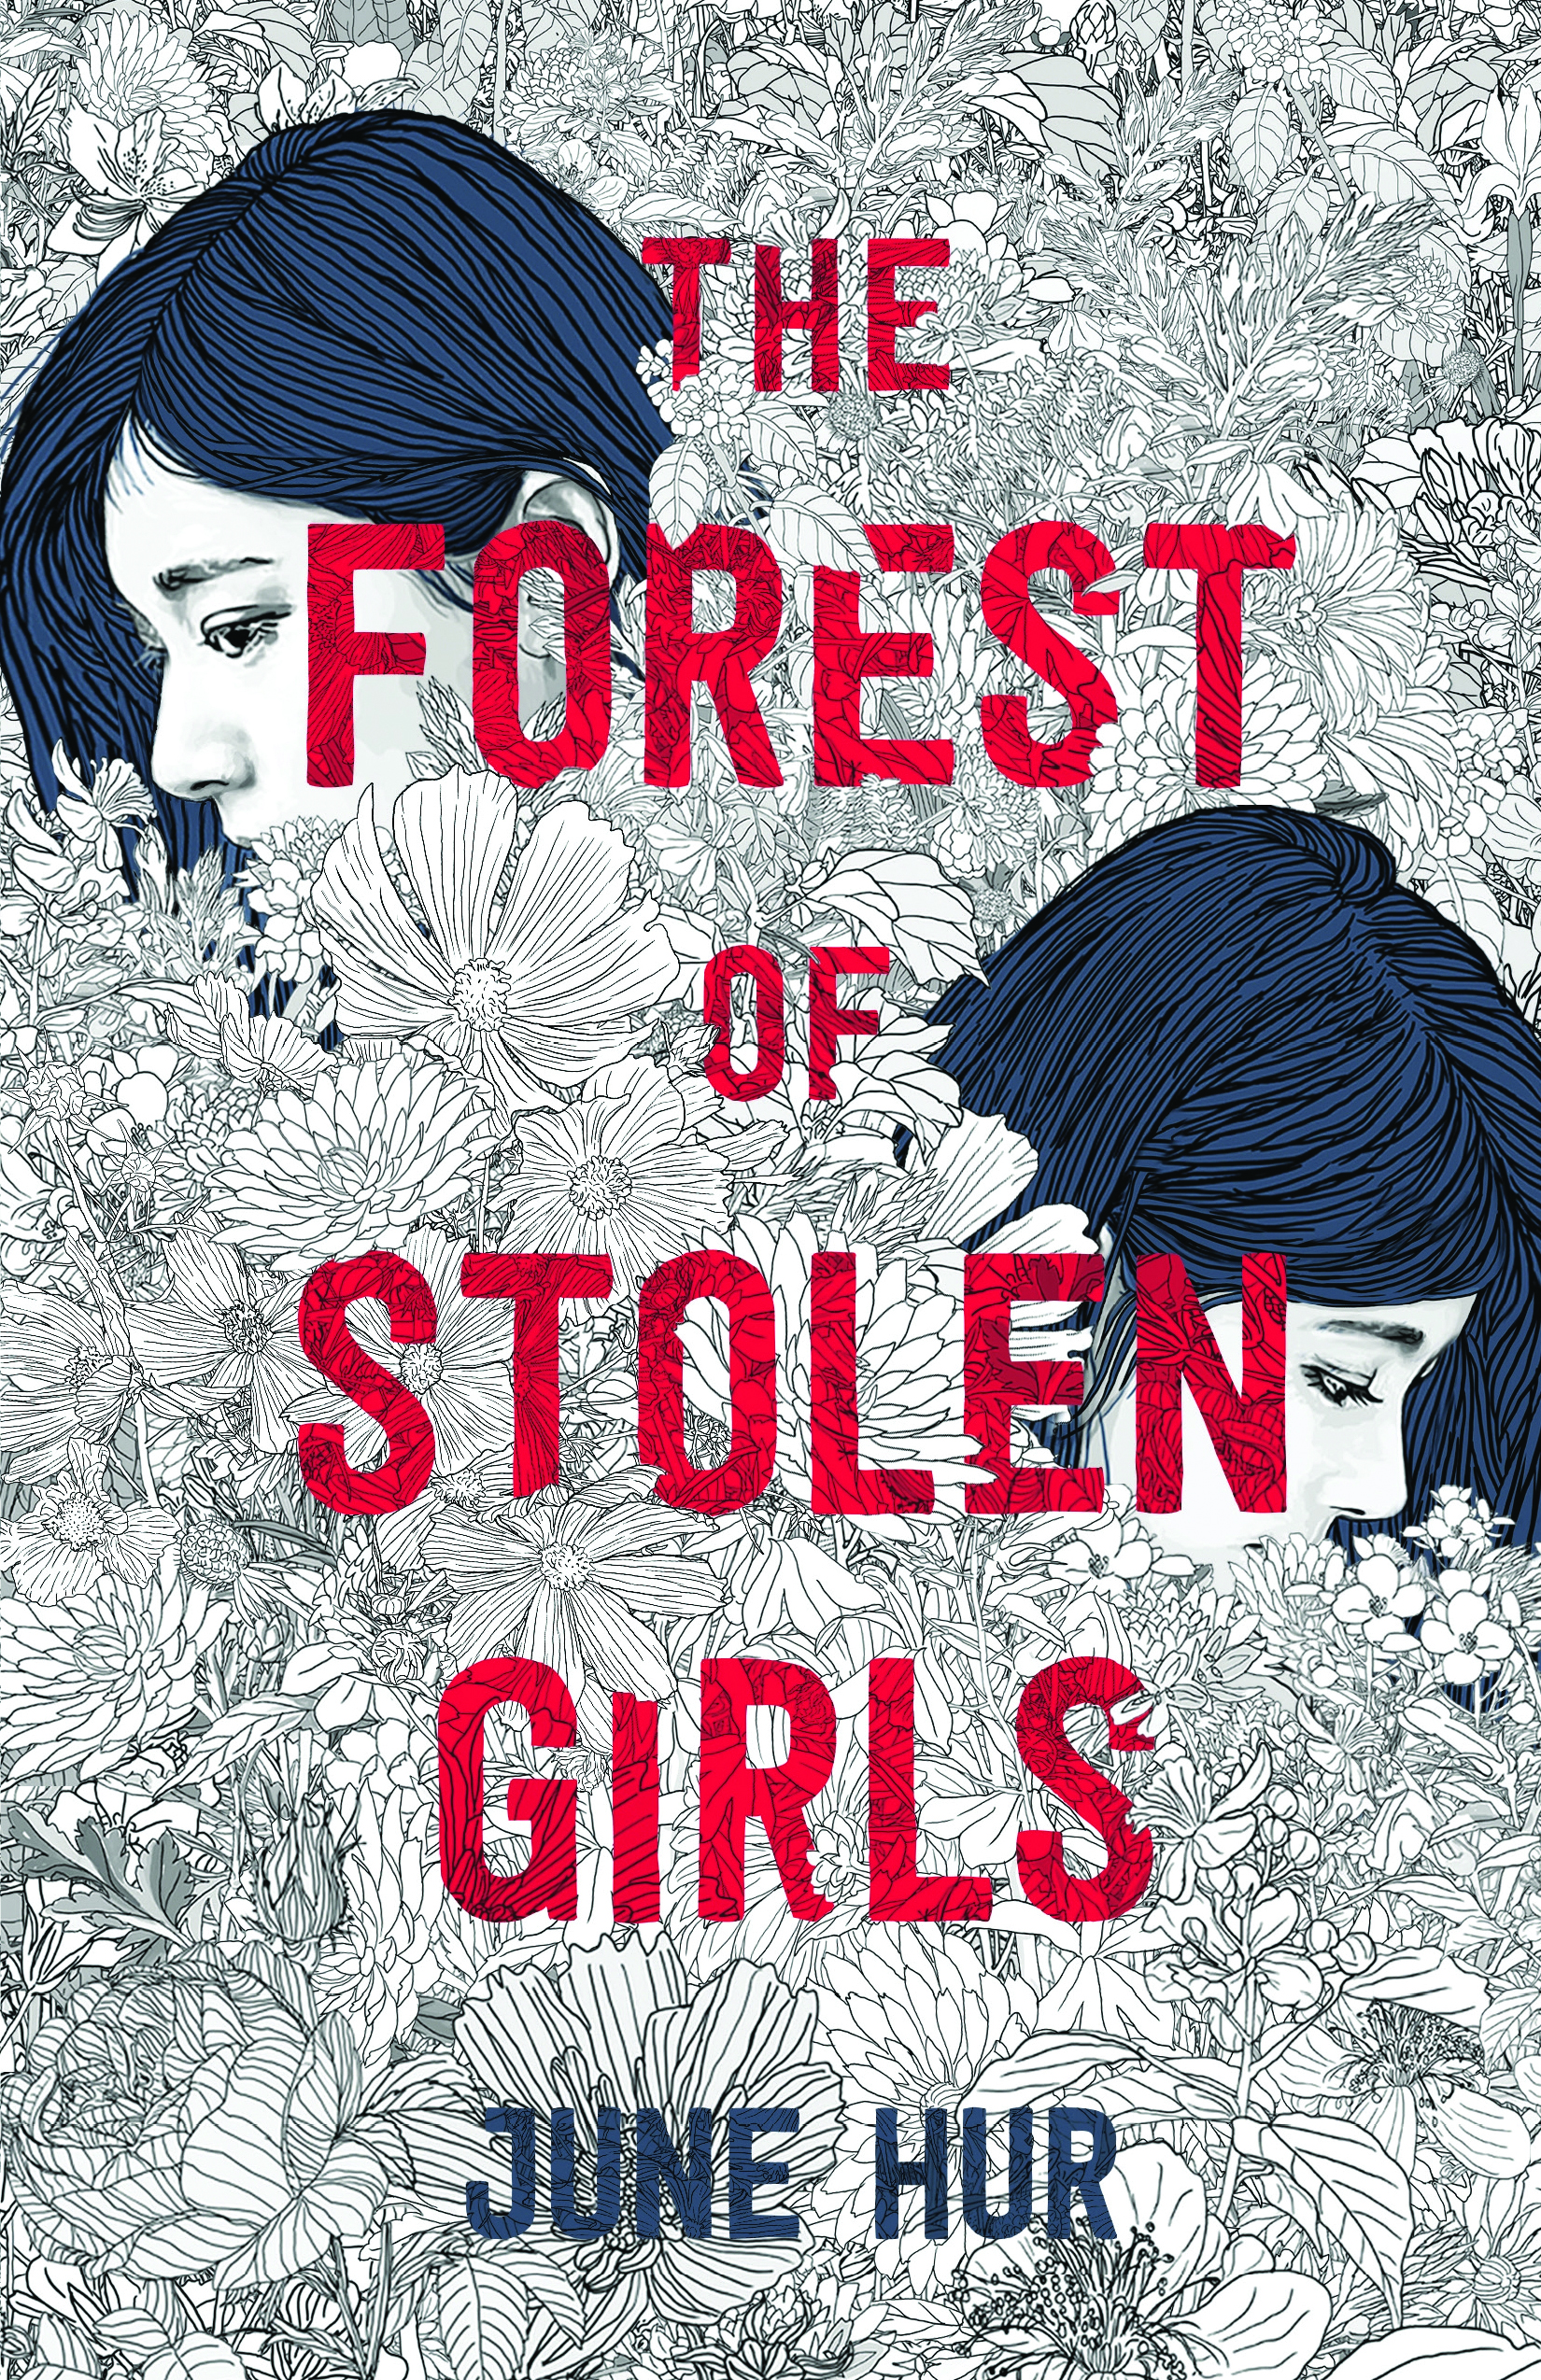 Cover of Forest of Stolen Girls with two girls in black and white flowers